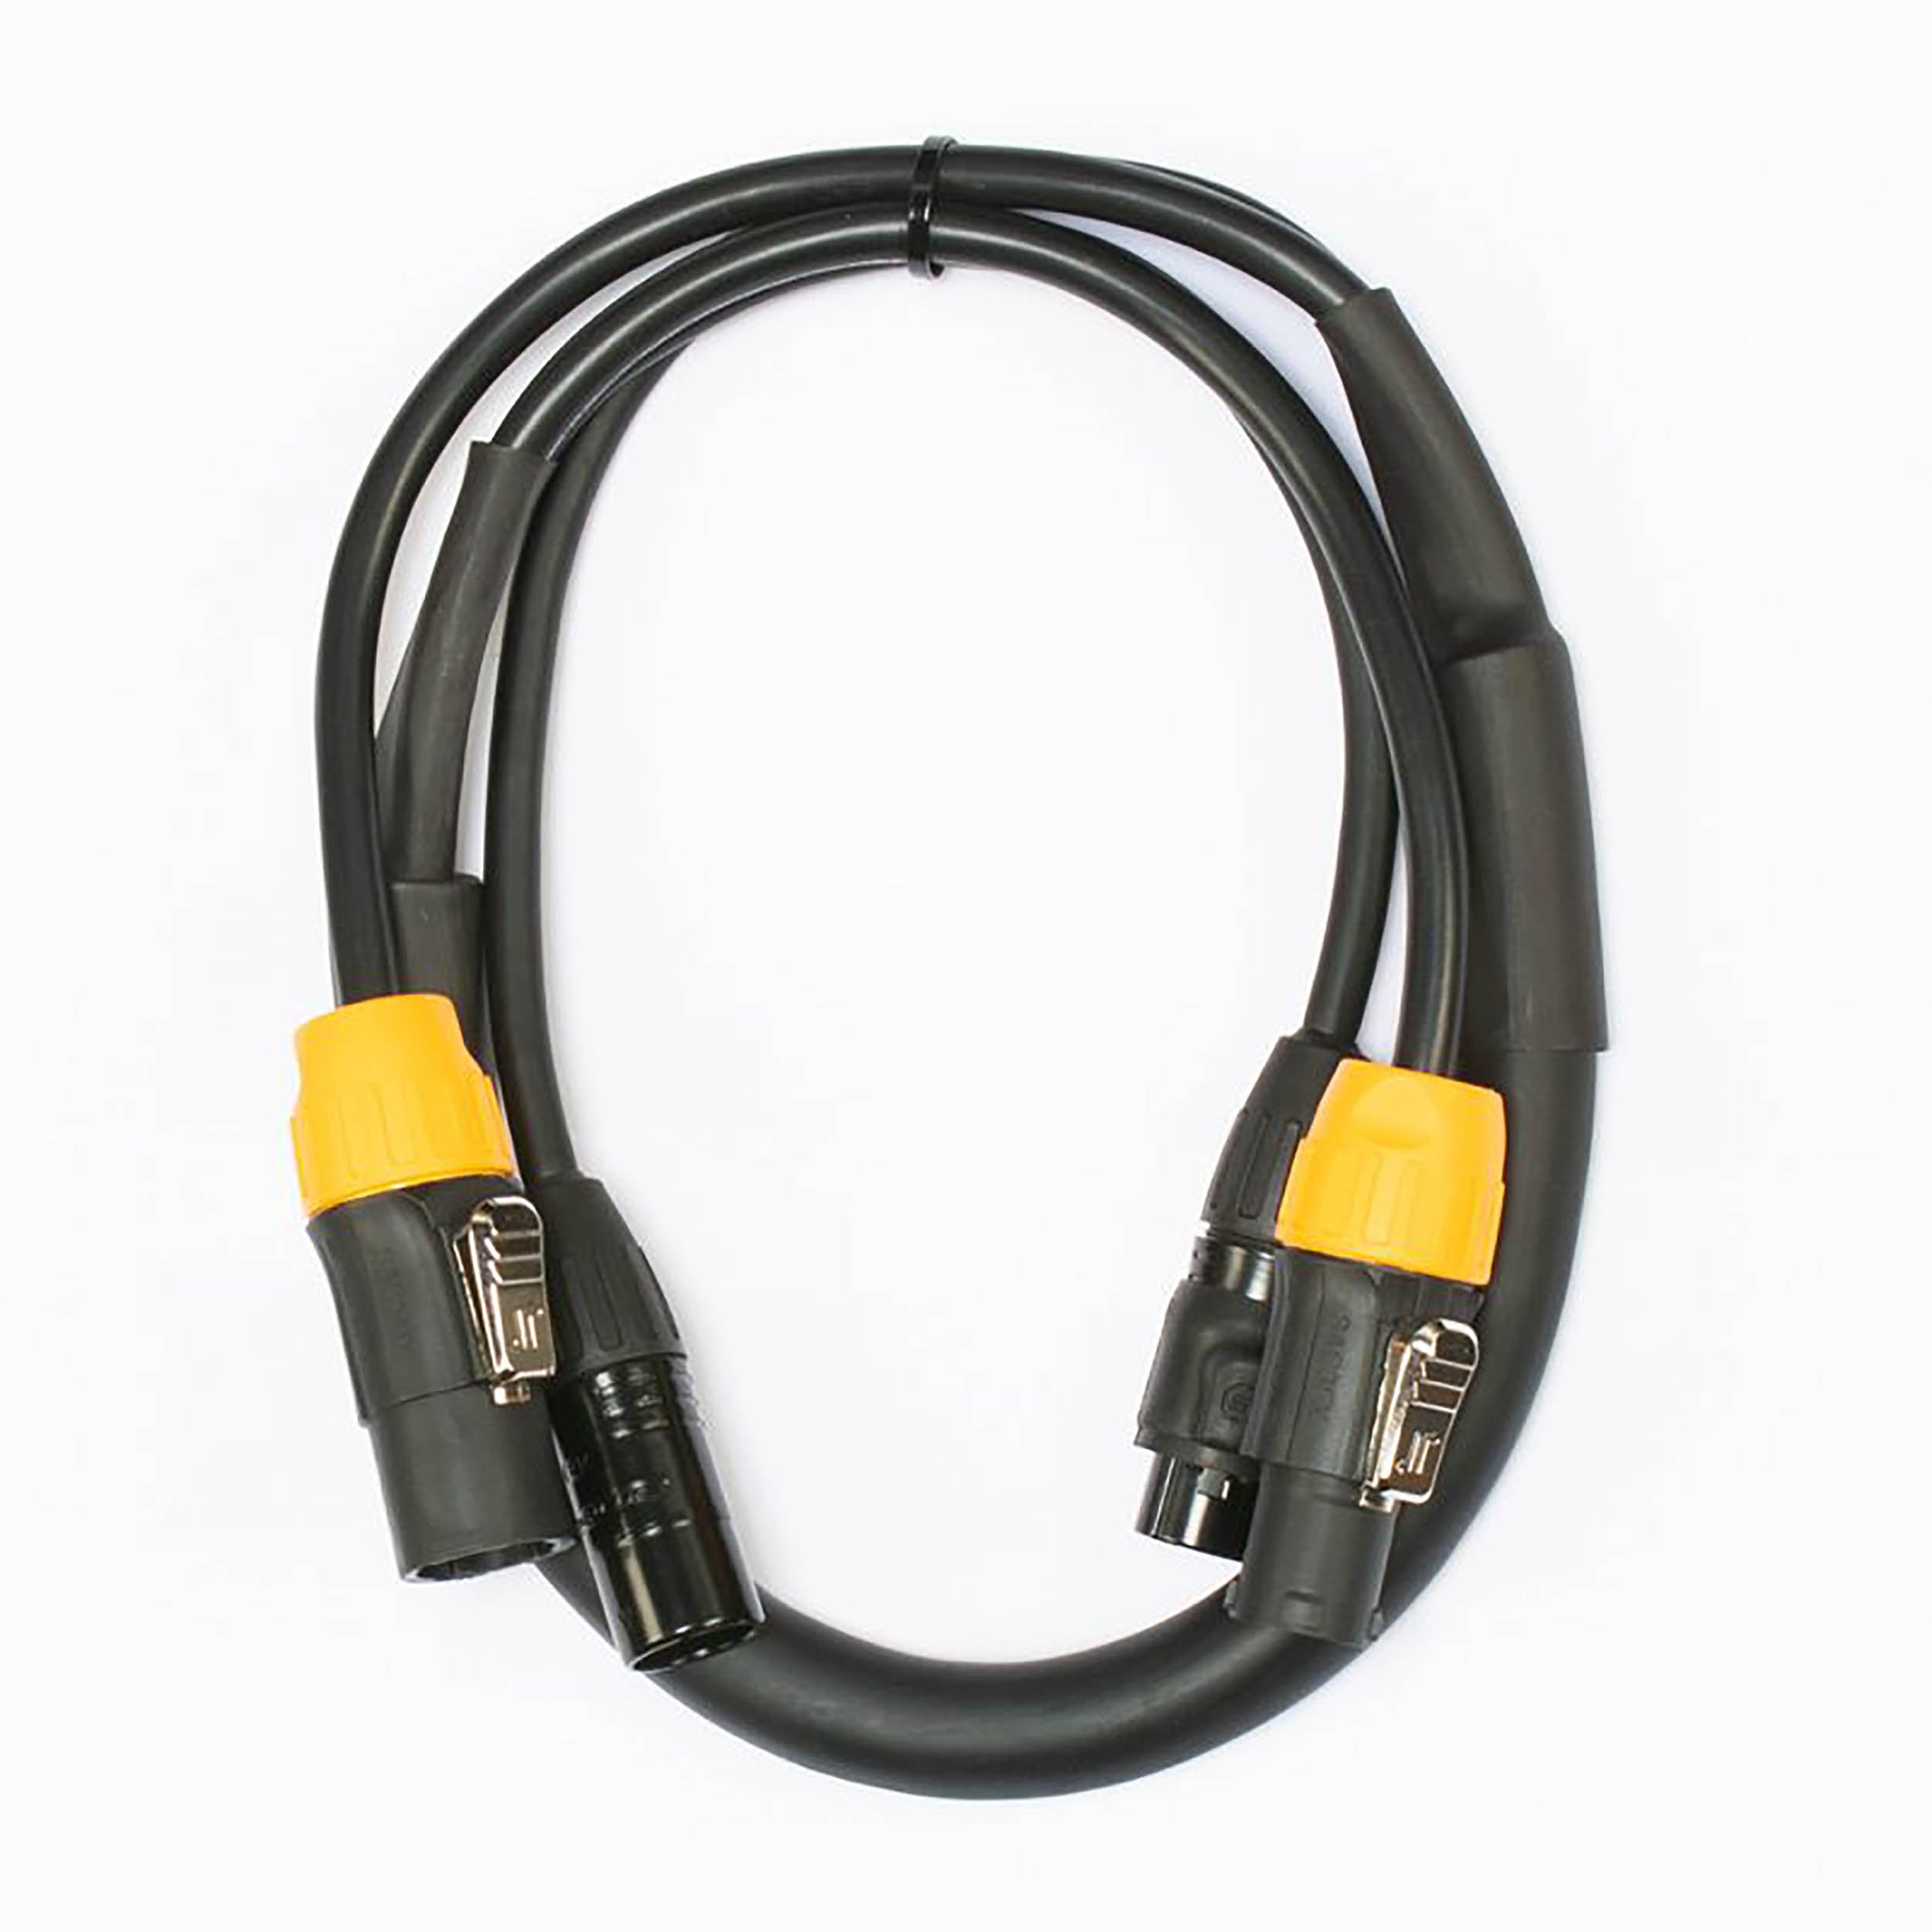 Accu-Cable AC5PTRUE, IP65-Rated 5-Pin DMX & Locking Power Link Combo Cable by Accu Cable